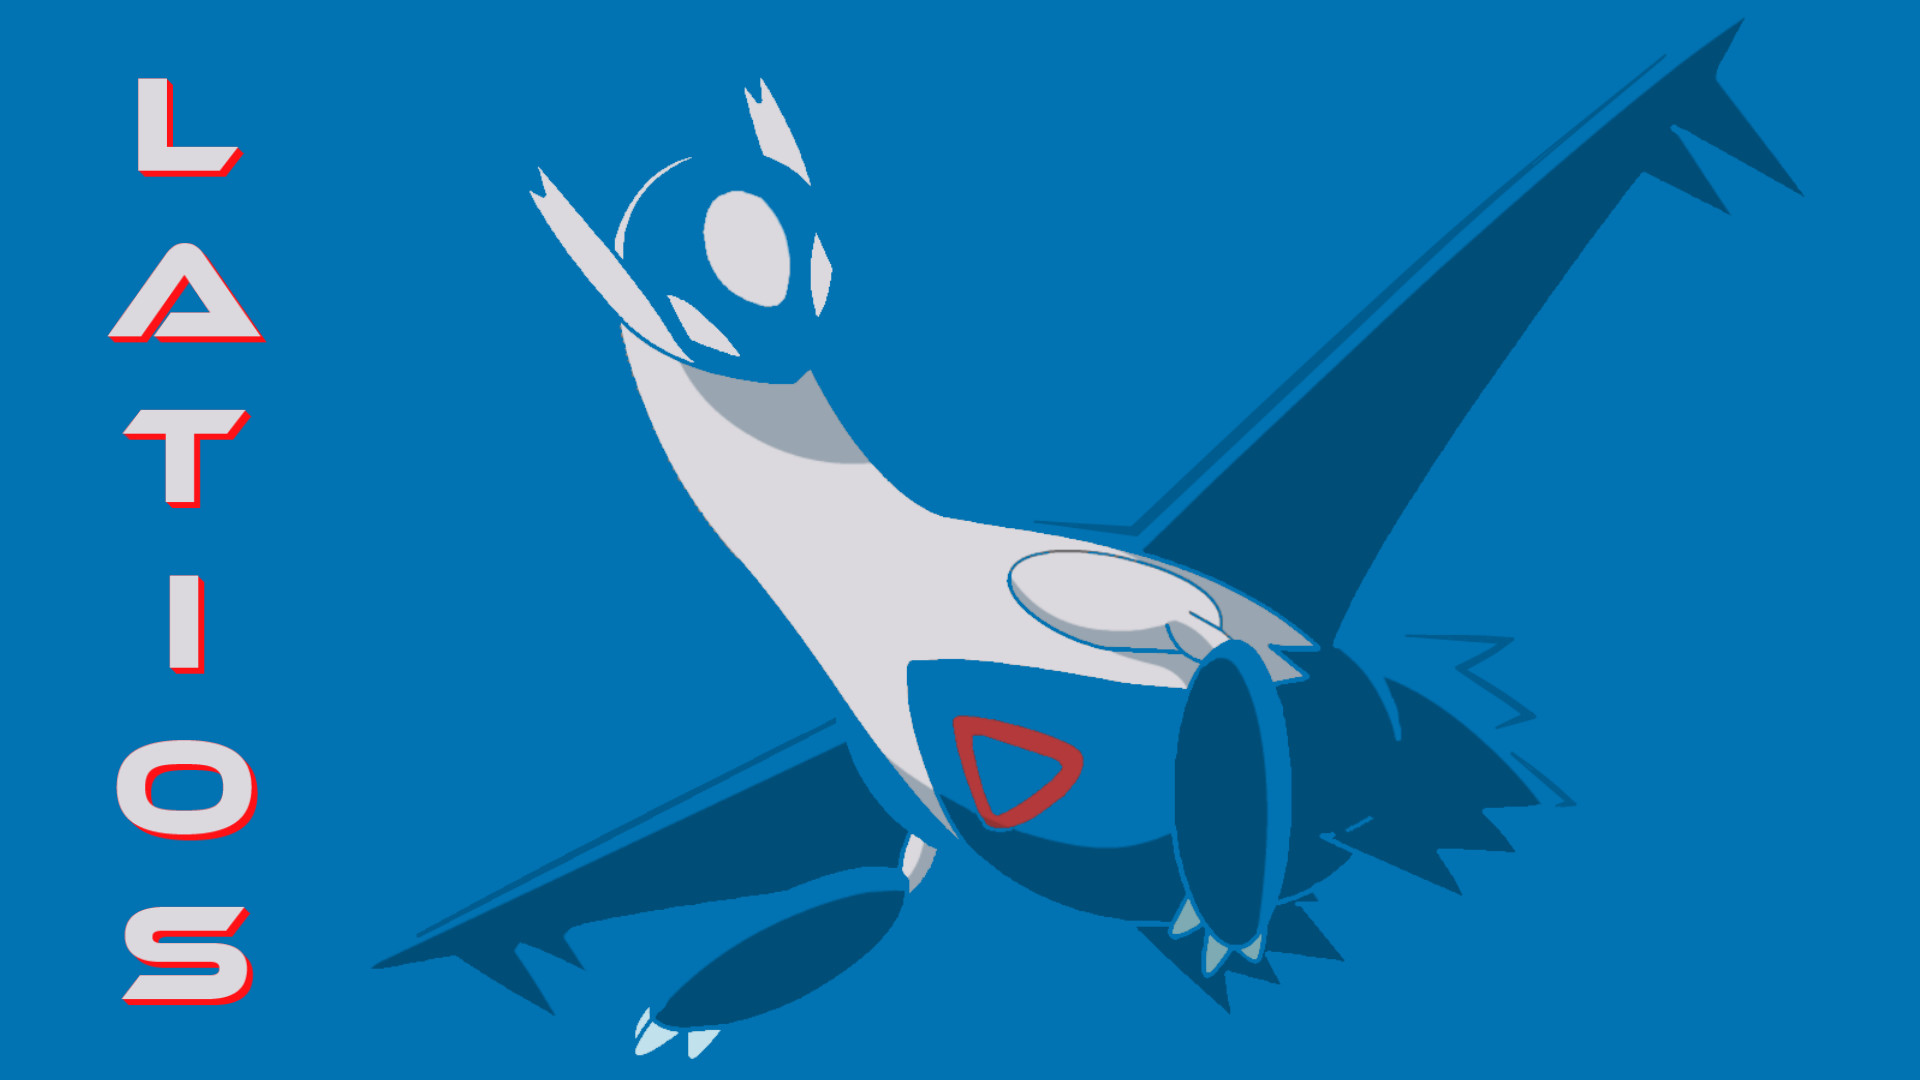 Latios Wallpaper The Best Image In